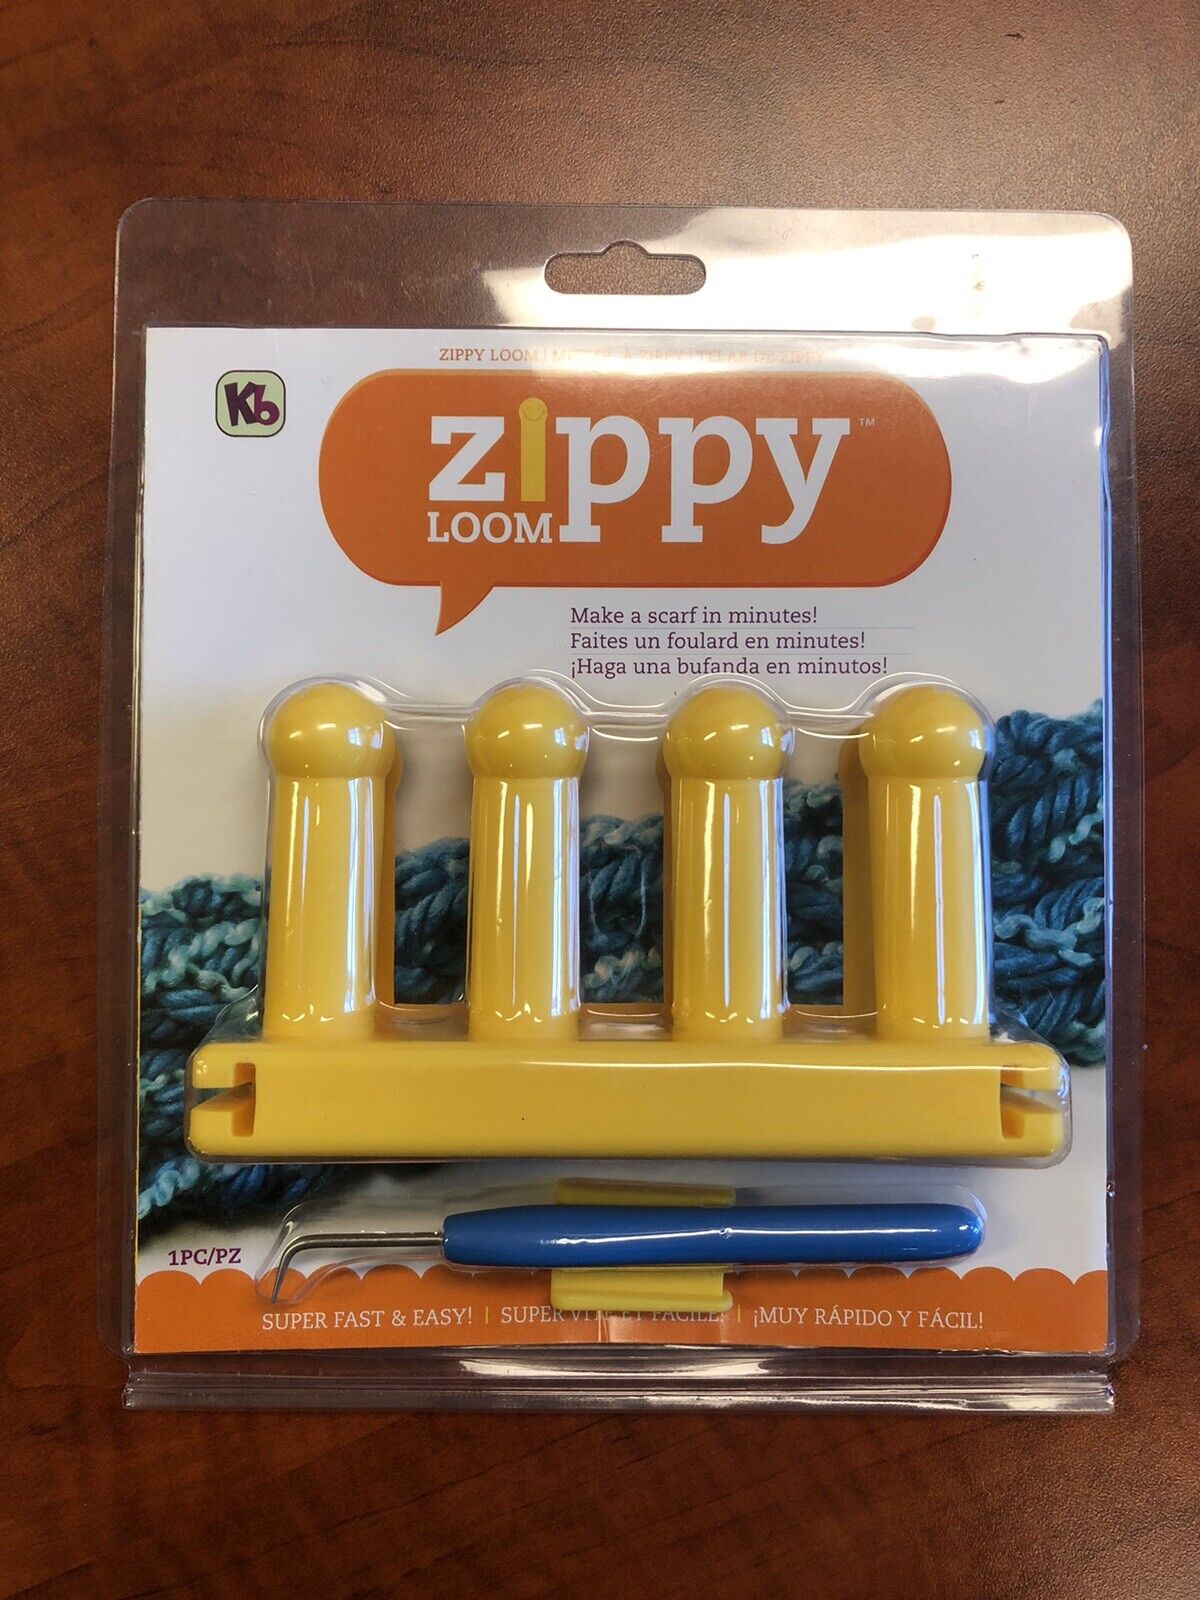 Kb - Zippy Loom - Make A Scarf In Minutes Super Fast & Easy Knitting New!